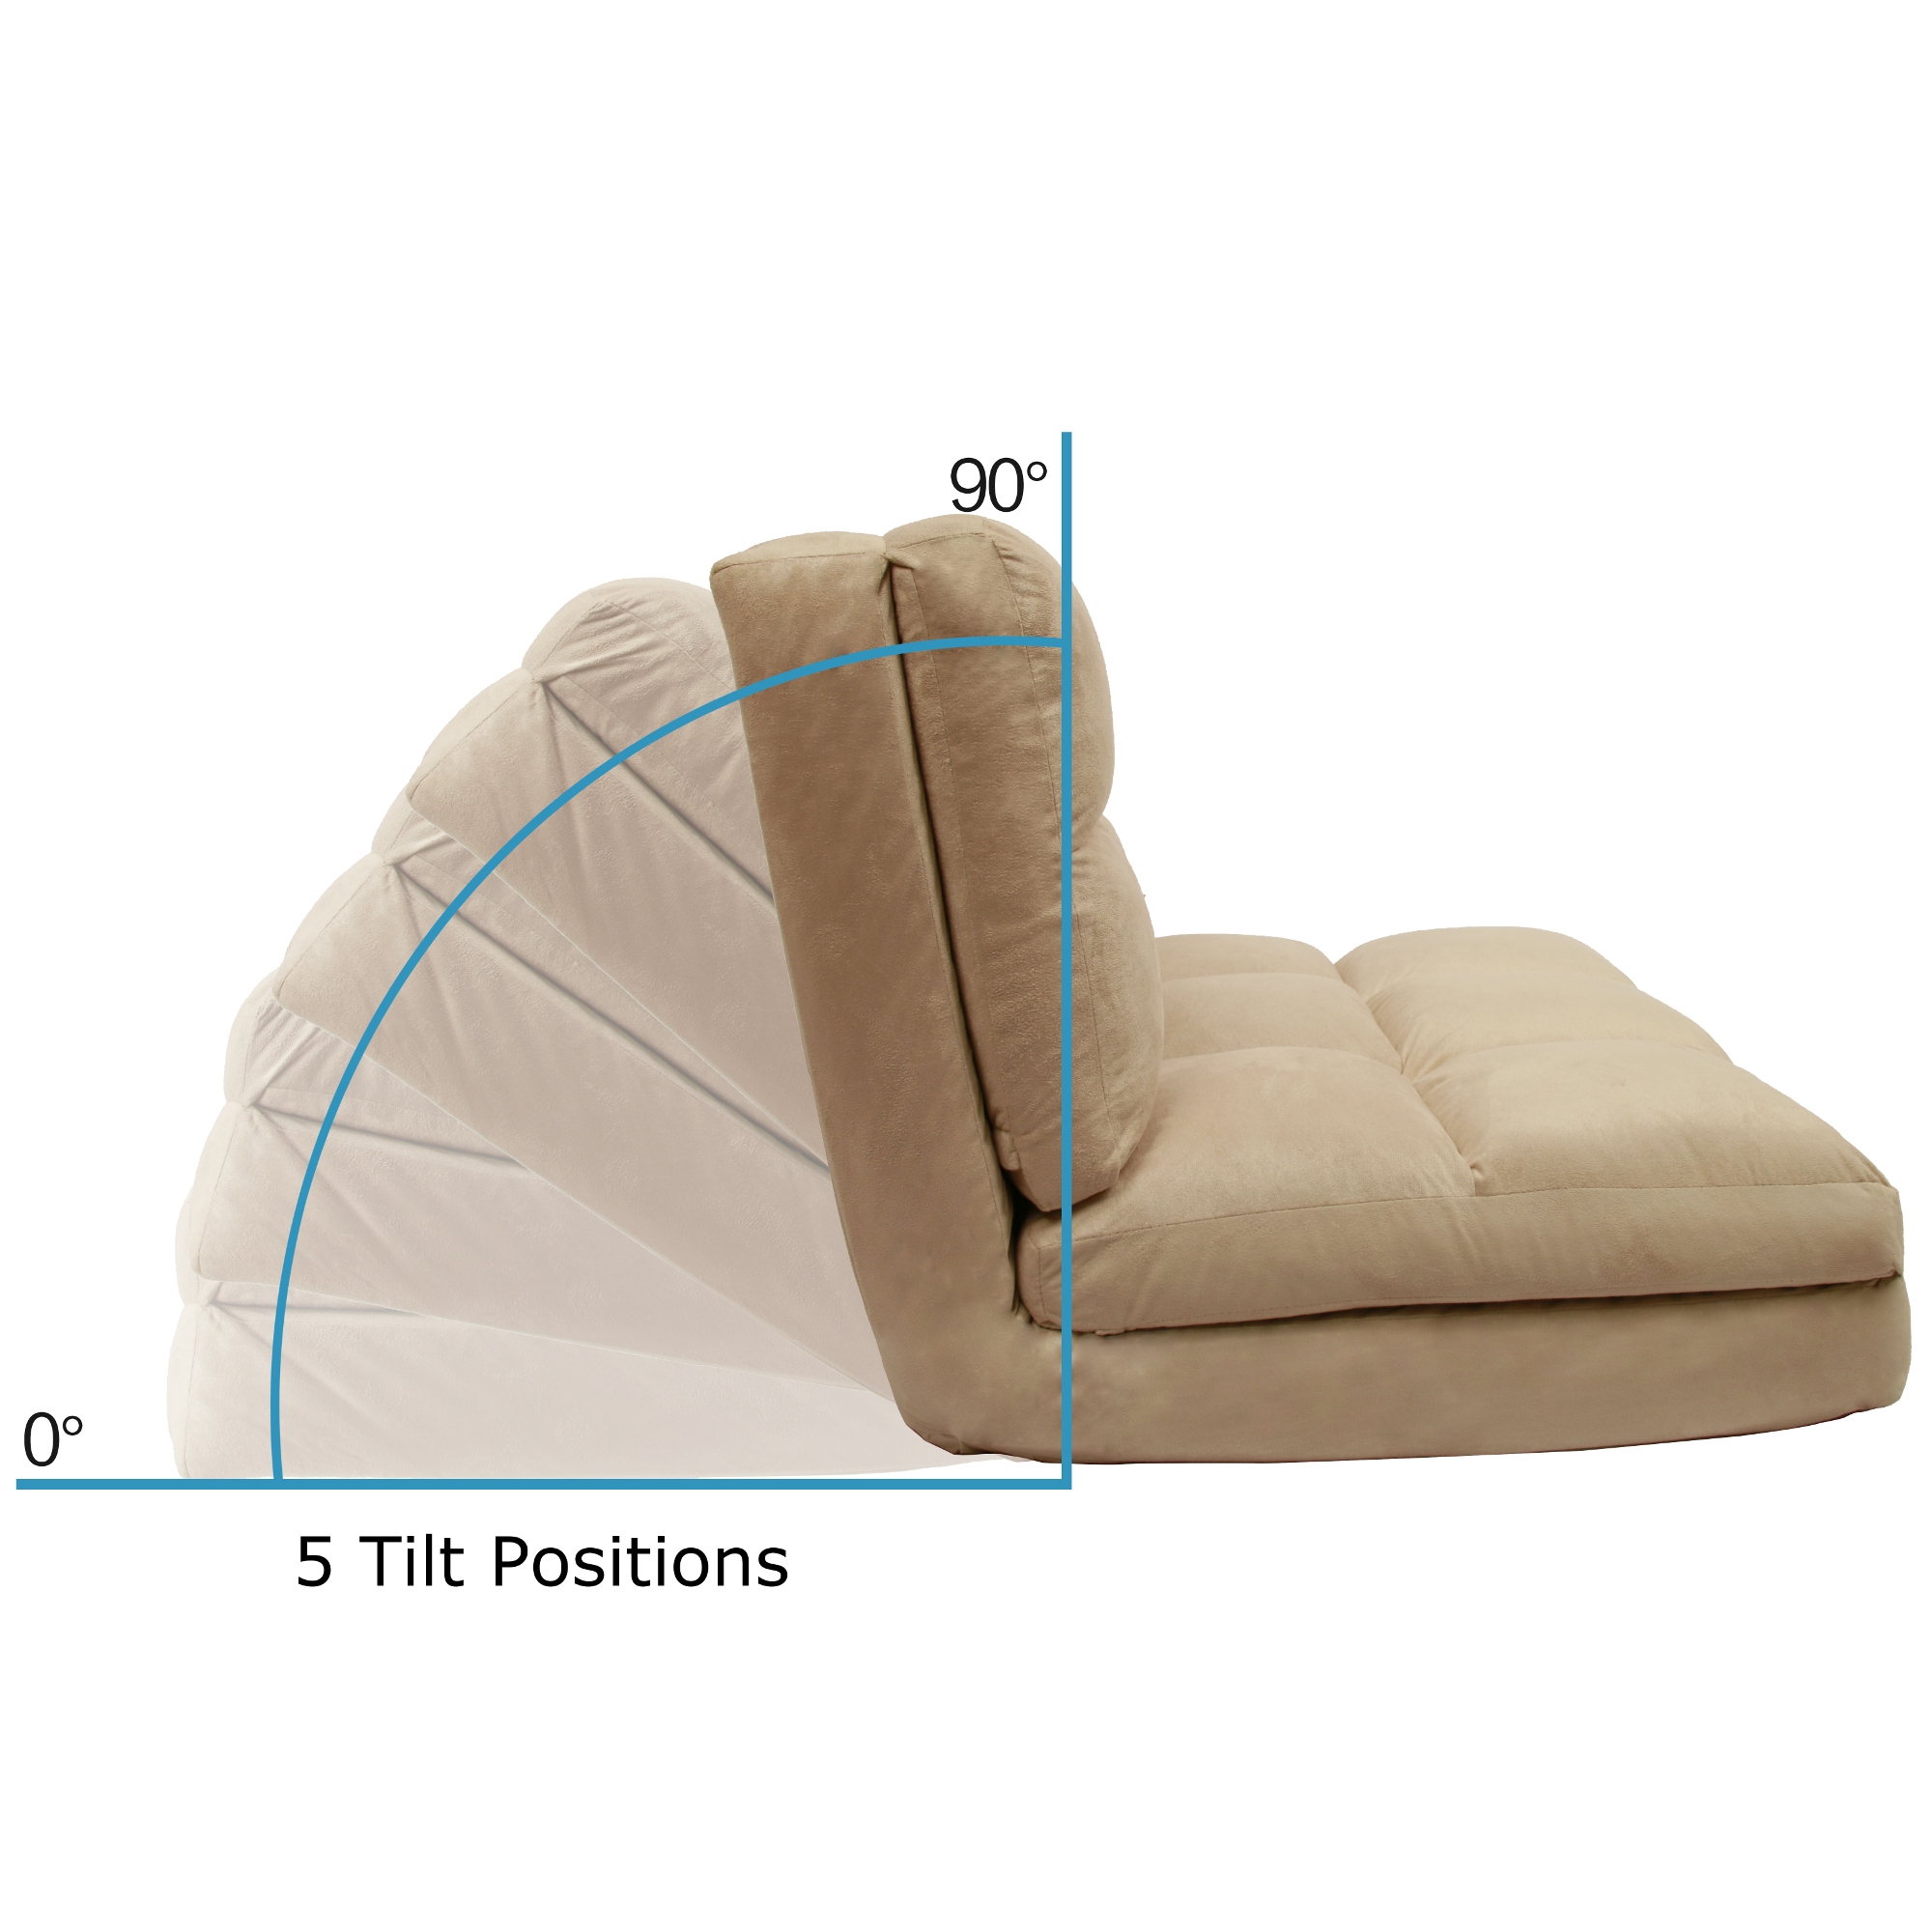 Loungie Microsuede Flip Chair Lounger Seat Beige - image 3 of 9